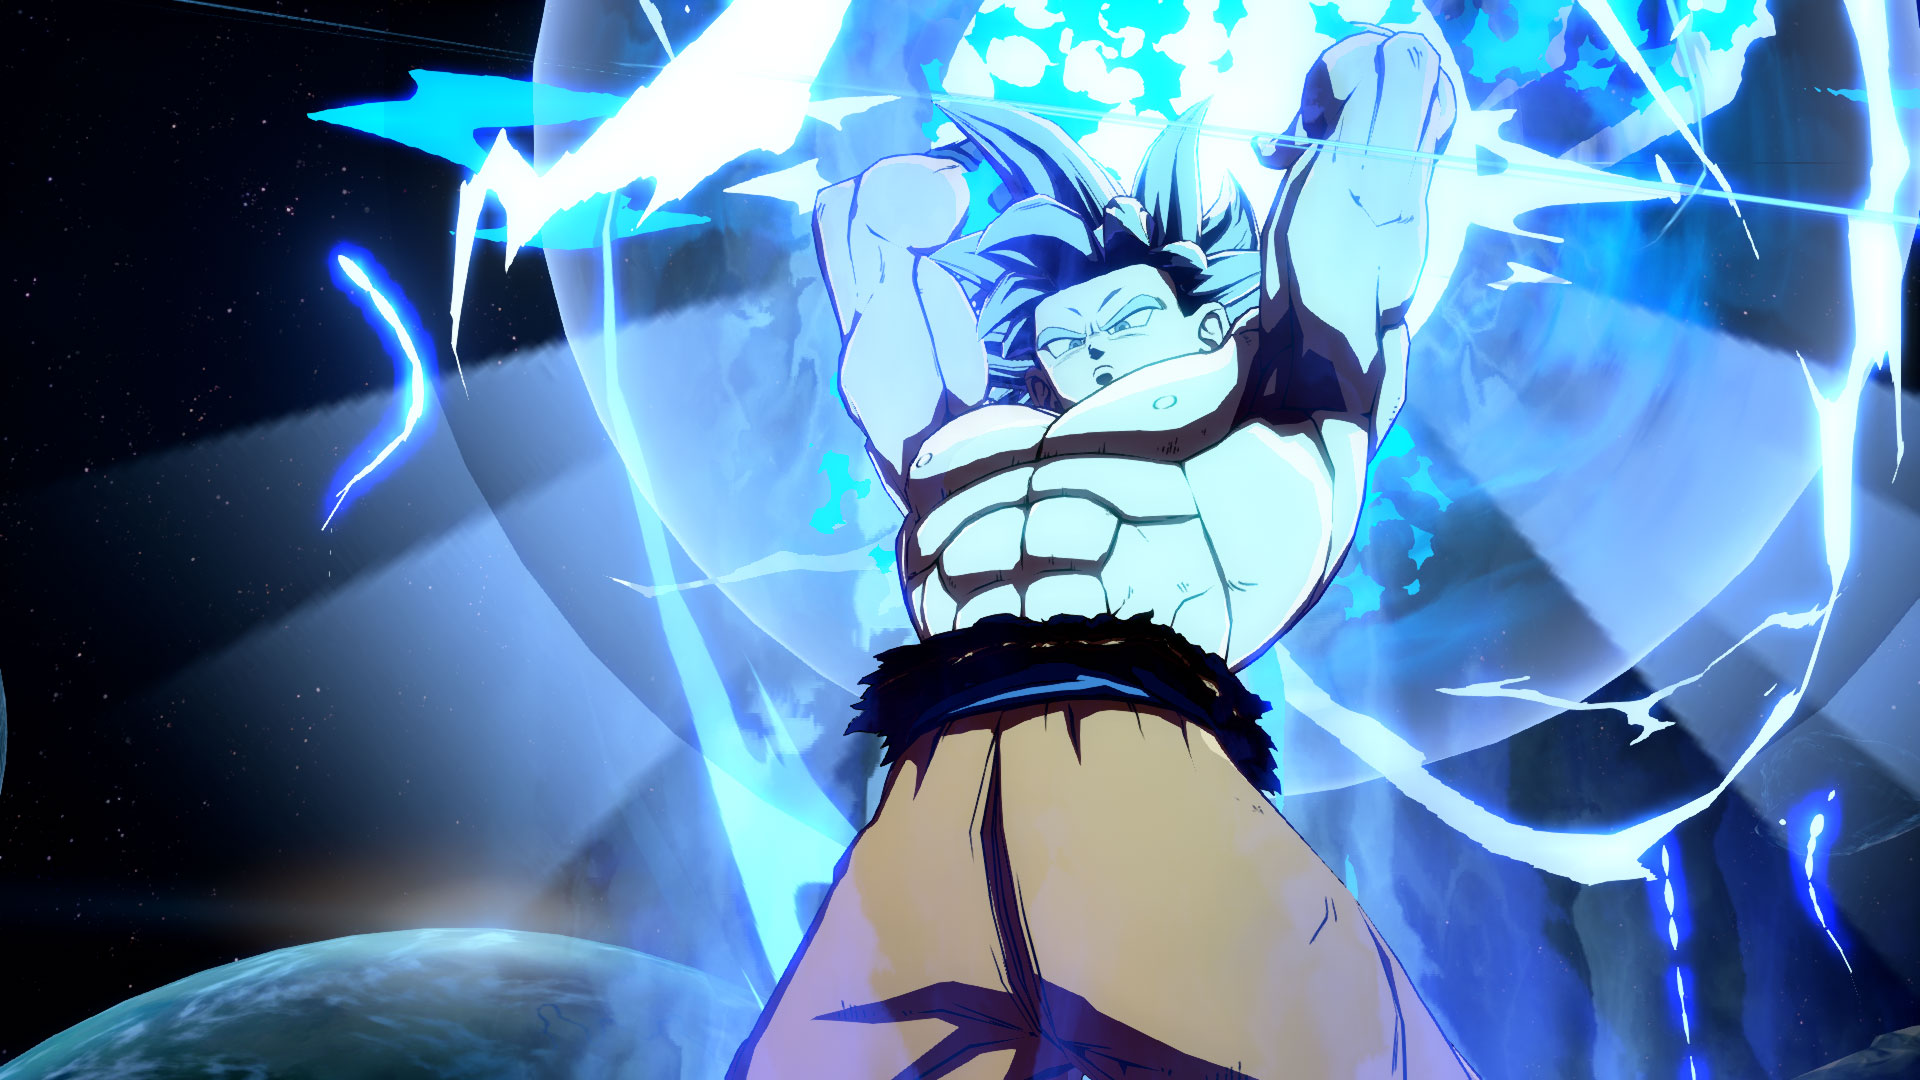 Ultra Instinct Goku Joins Dragon Ball FighterZ Later This Month